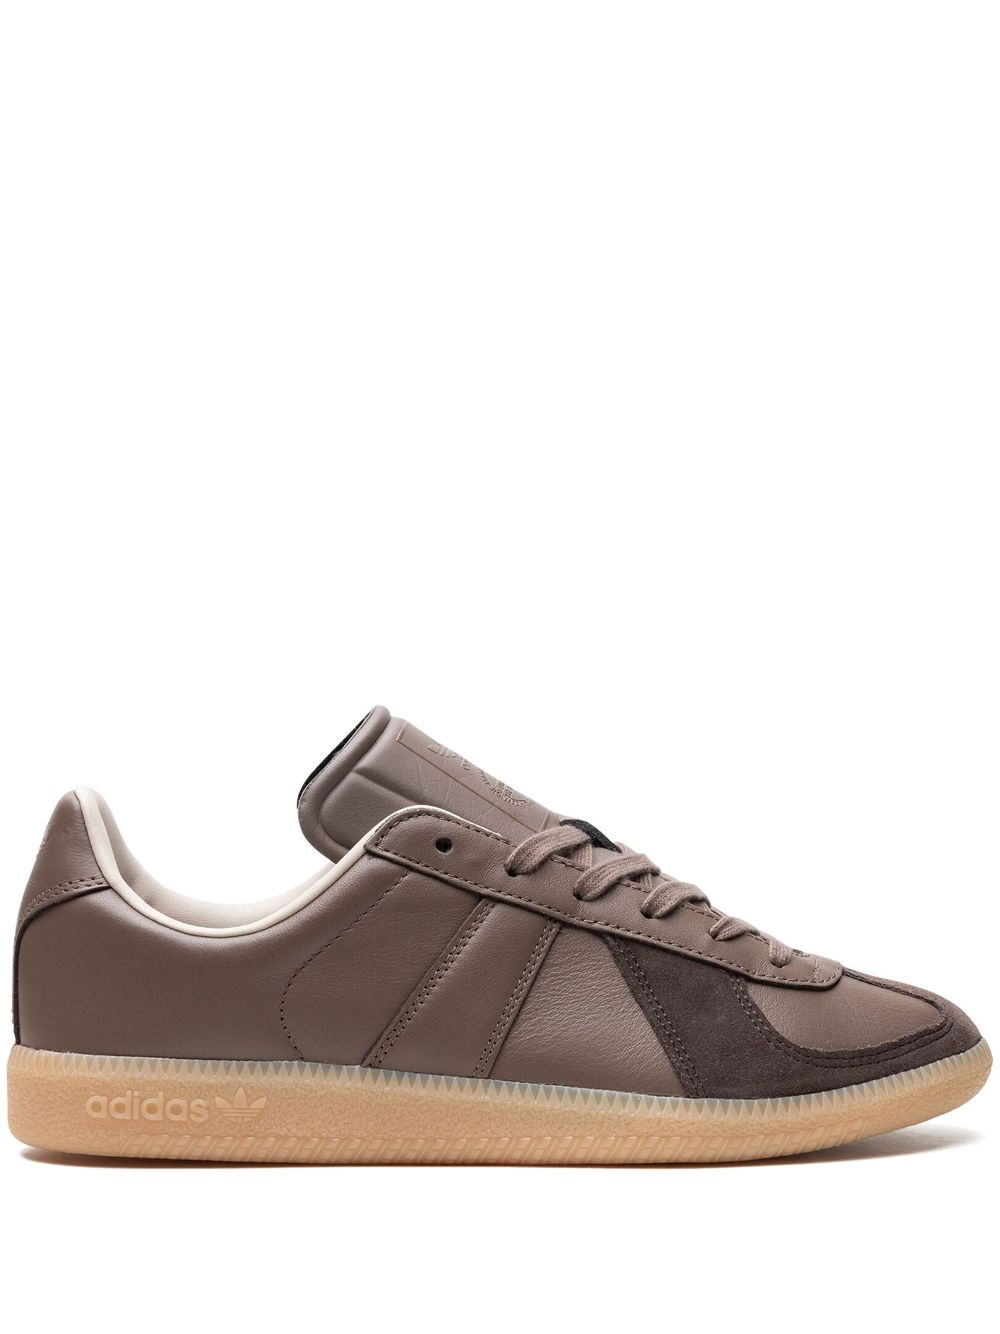 Adidas Originals X Size? Bw Army "brown/gum" Trainers